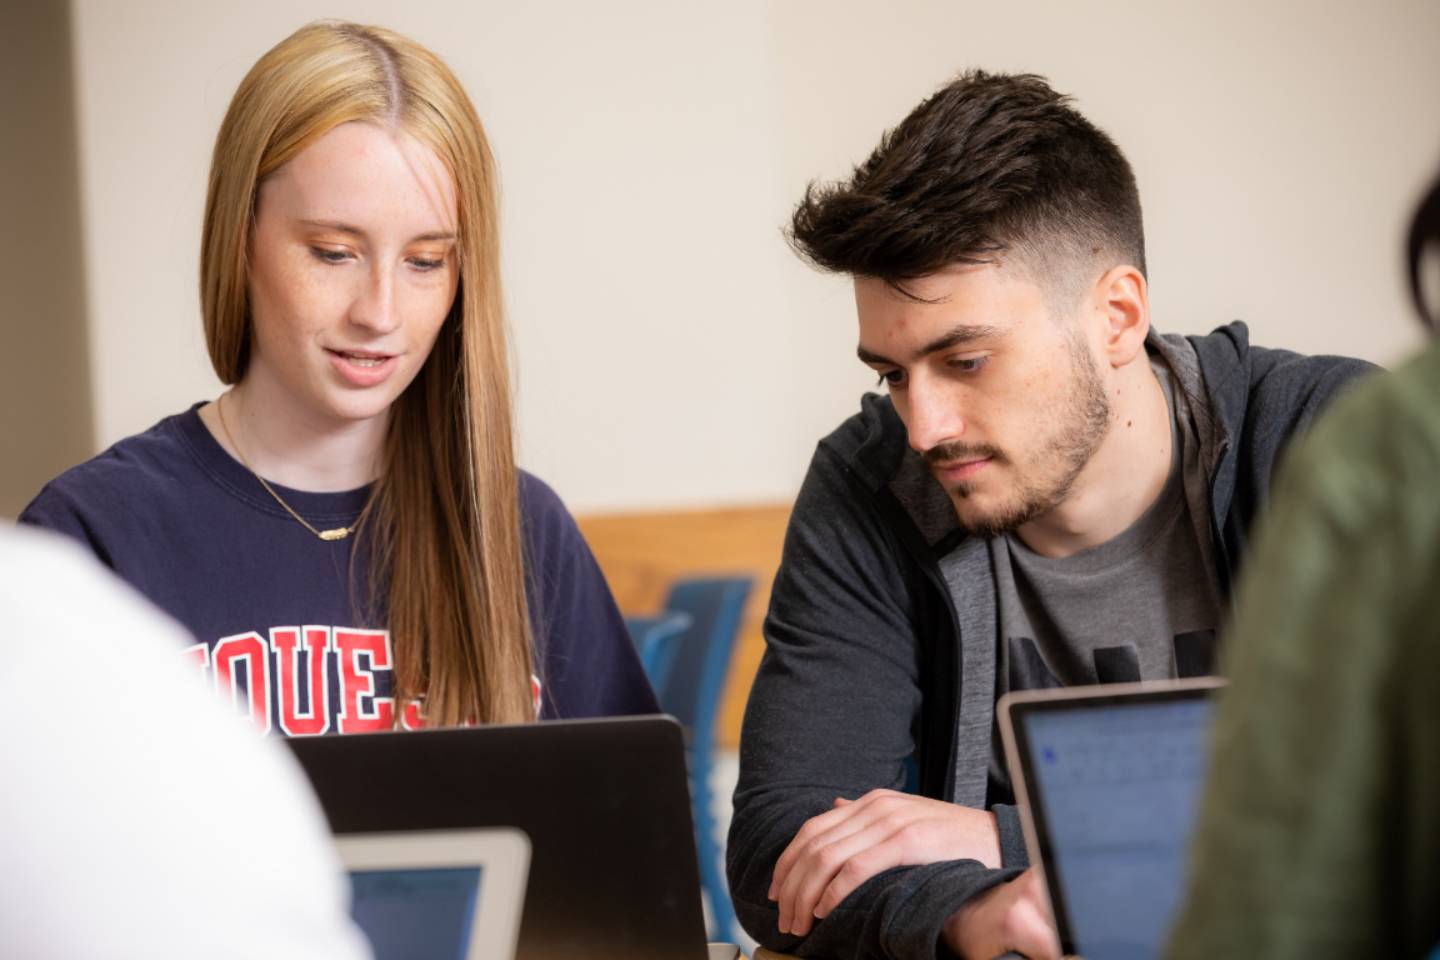 two students looking at a laptop in the classroom